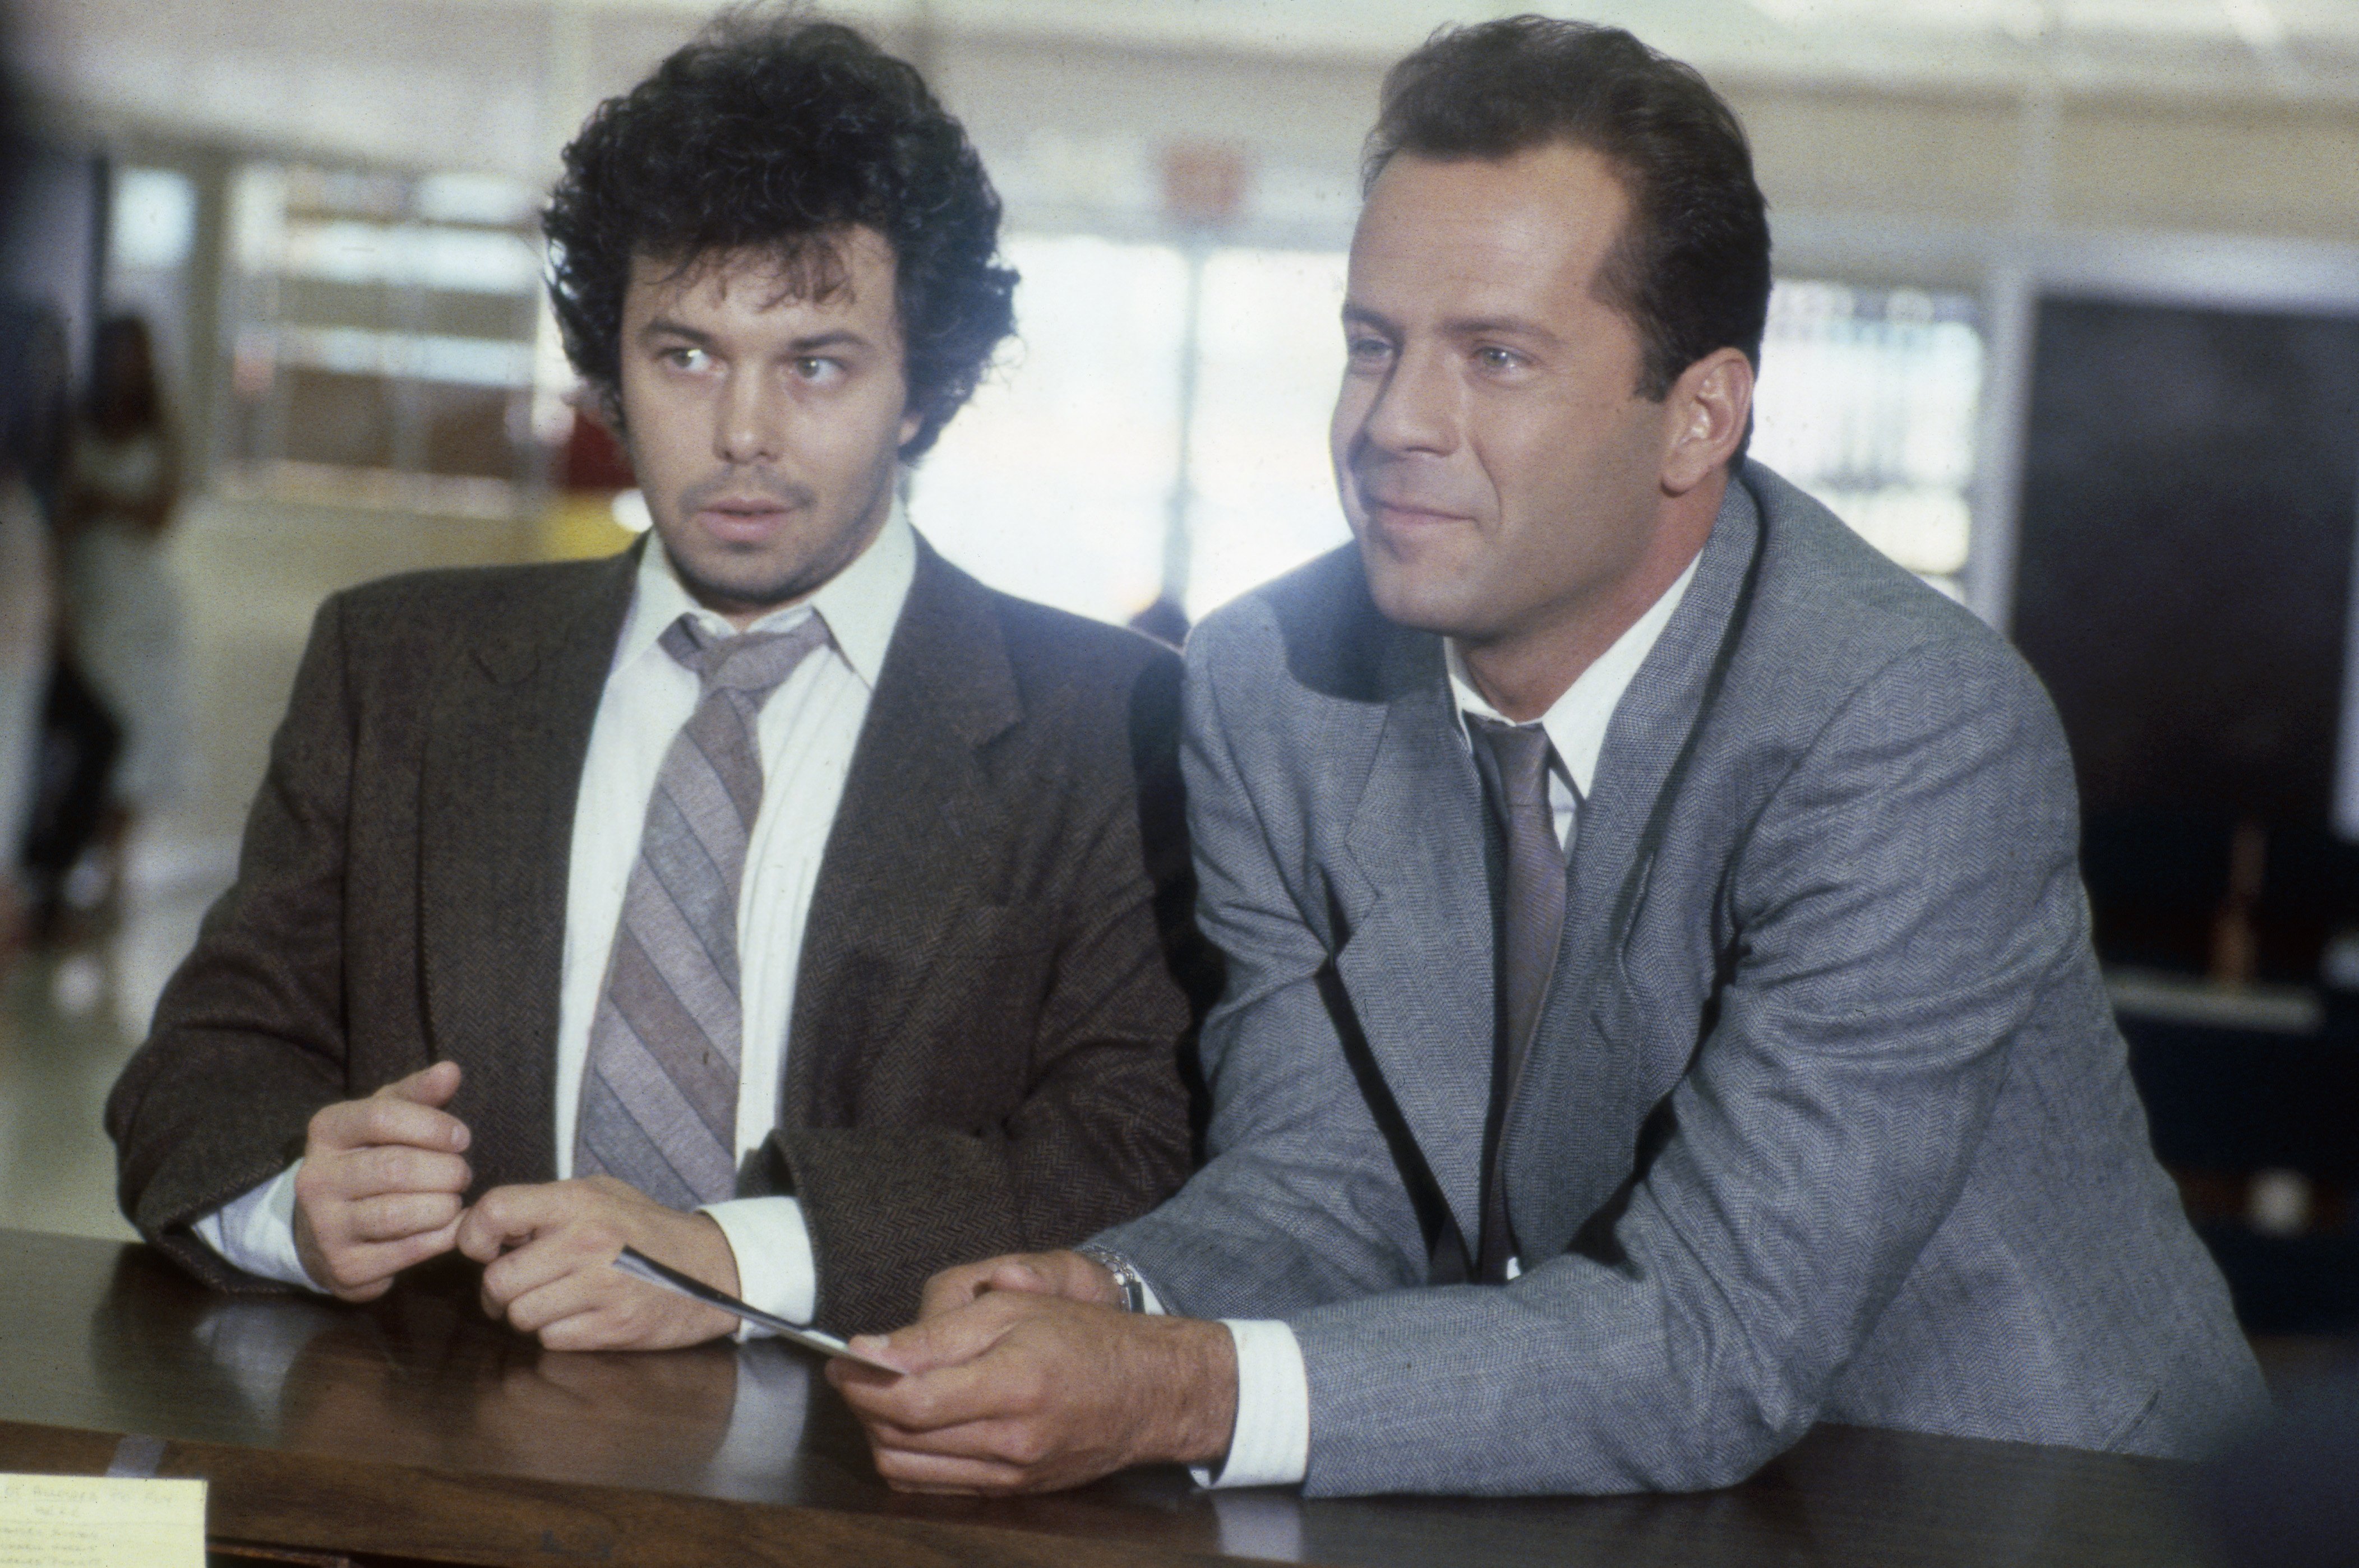 Actor Curtis Armstrong as Herbert Viola and Bruce Willis as David Addison in the hit series "Moonlighting," on August 19, 1987. / Source: Getty Images